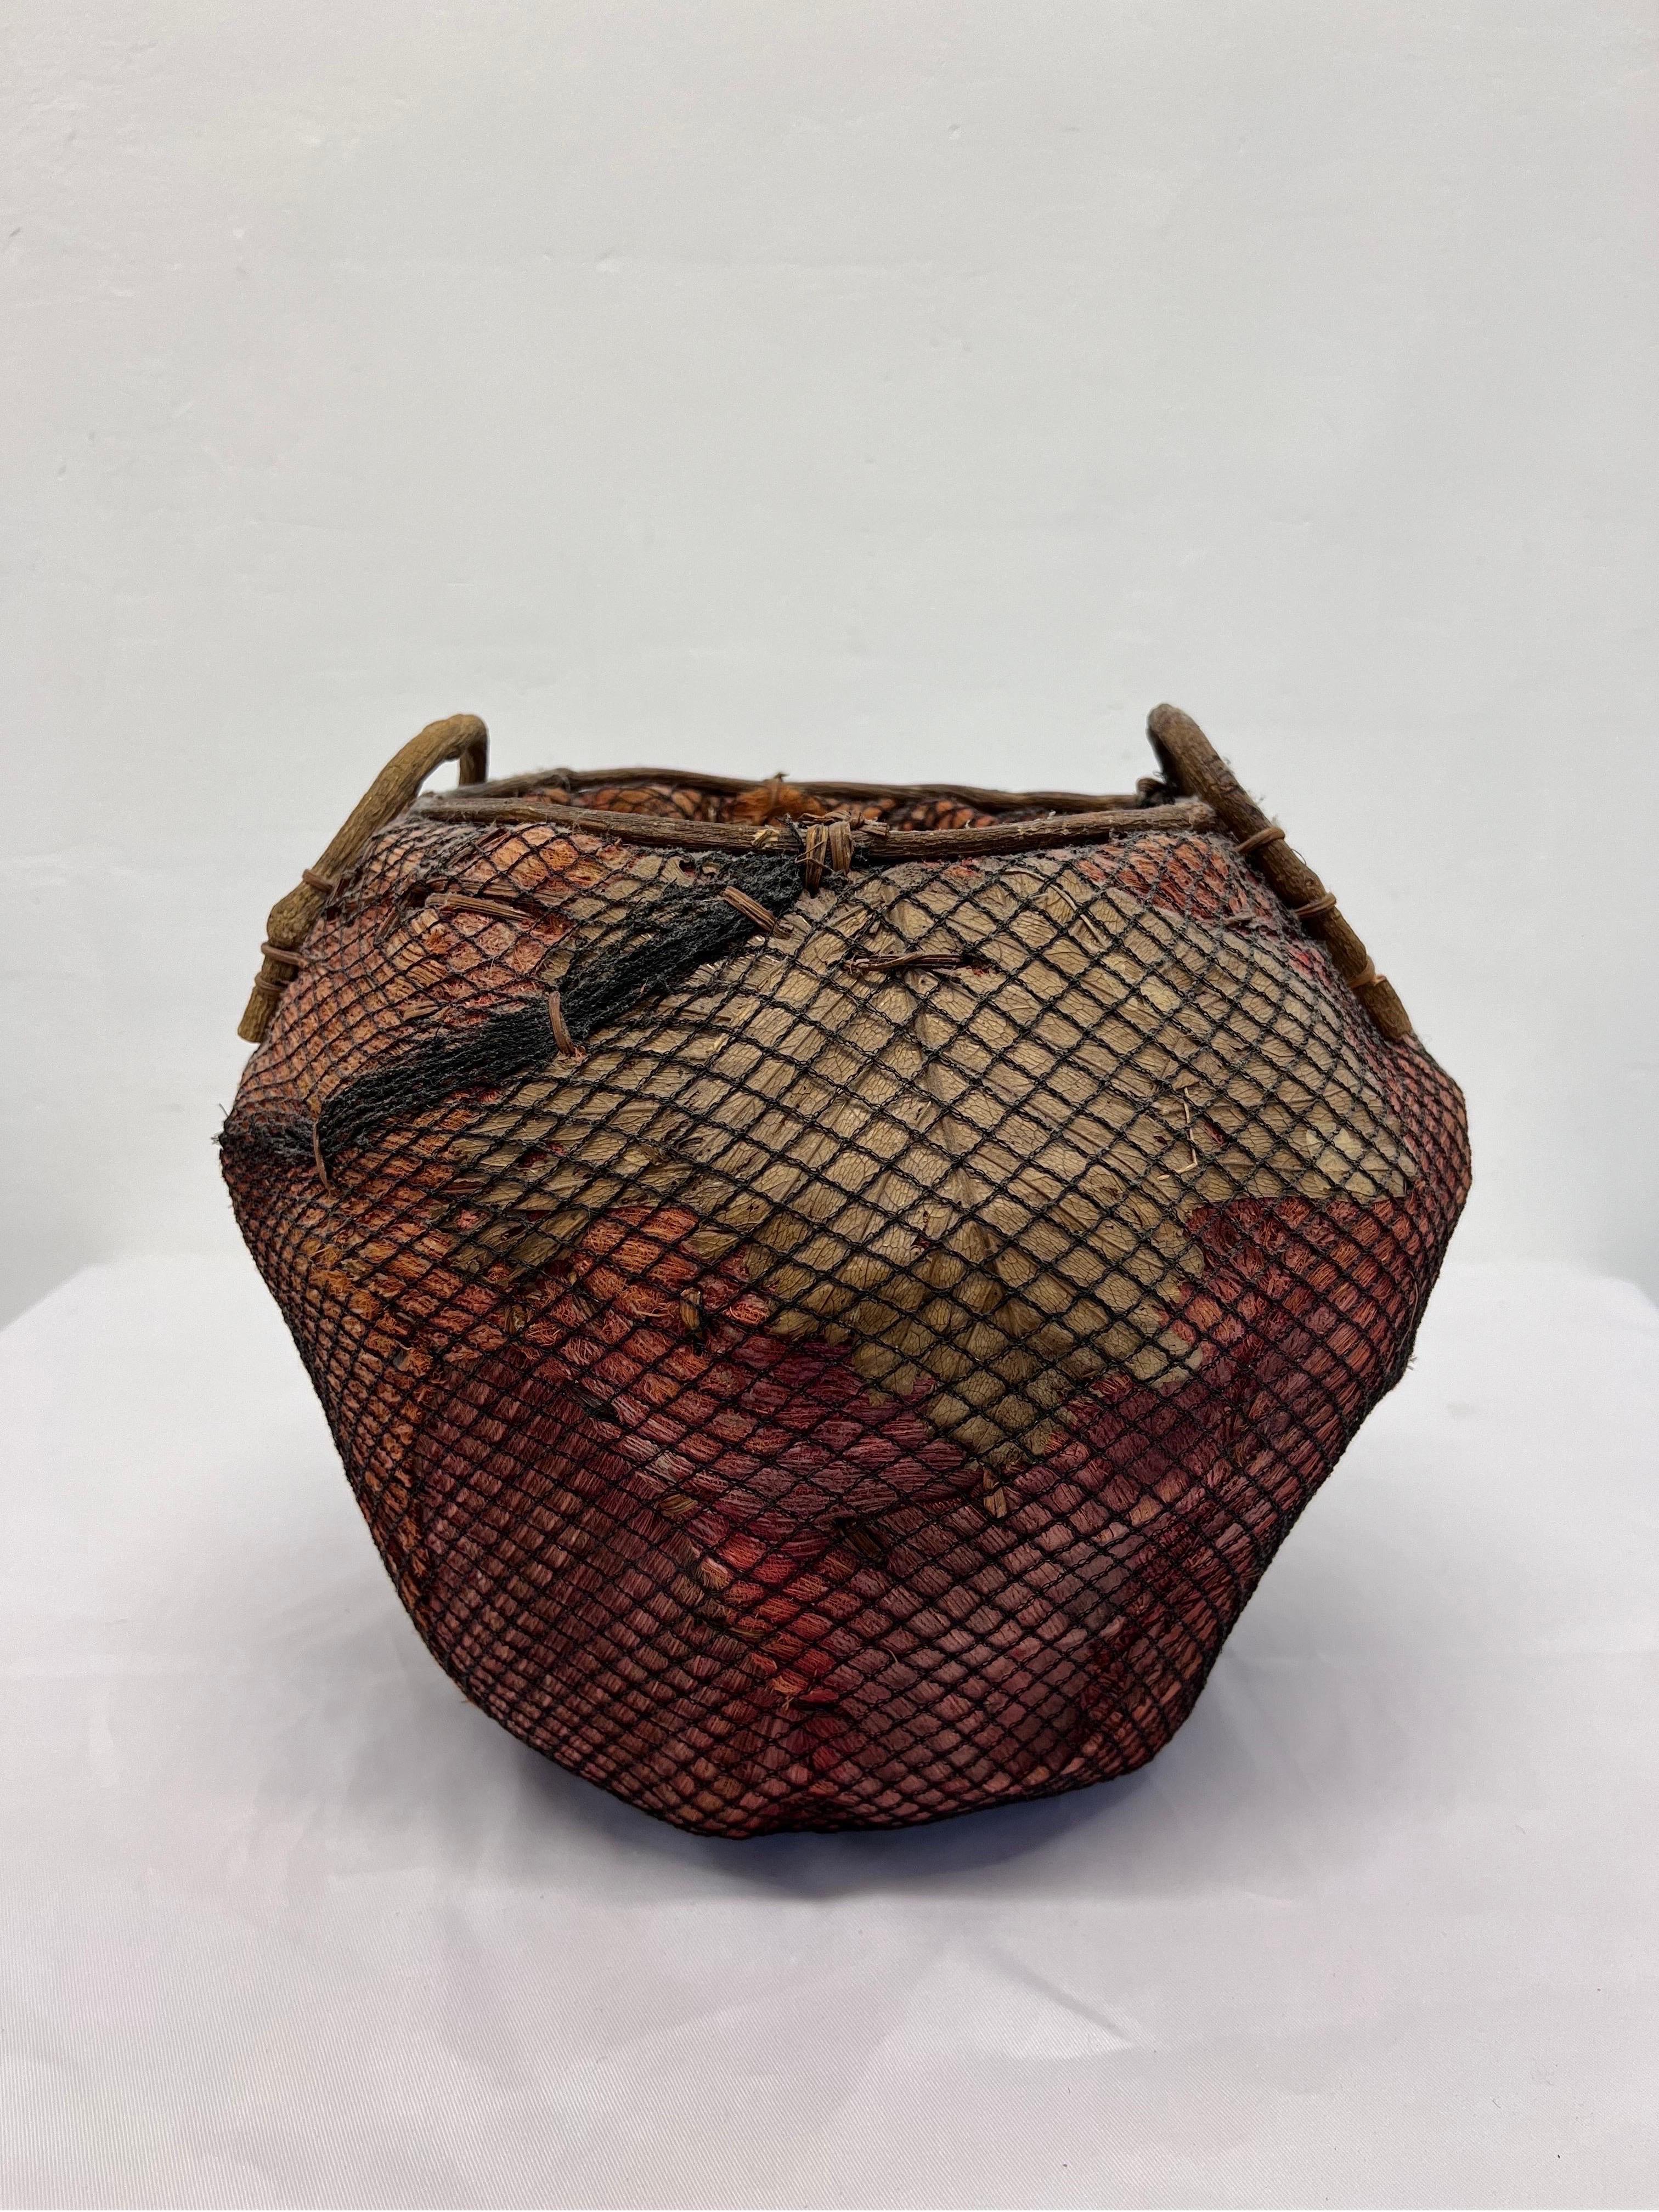 Woven natural fiber and leaf basket around a metal frame and wrapped in fishnet circa 1970s and made in the Philippines.